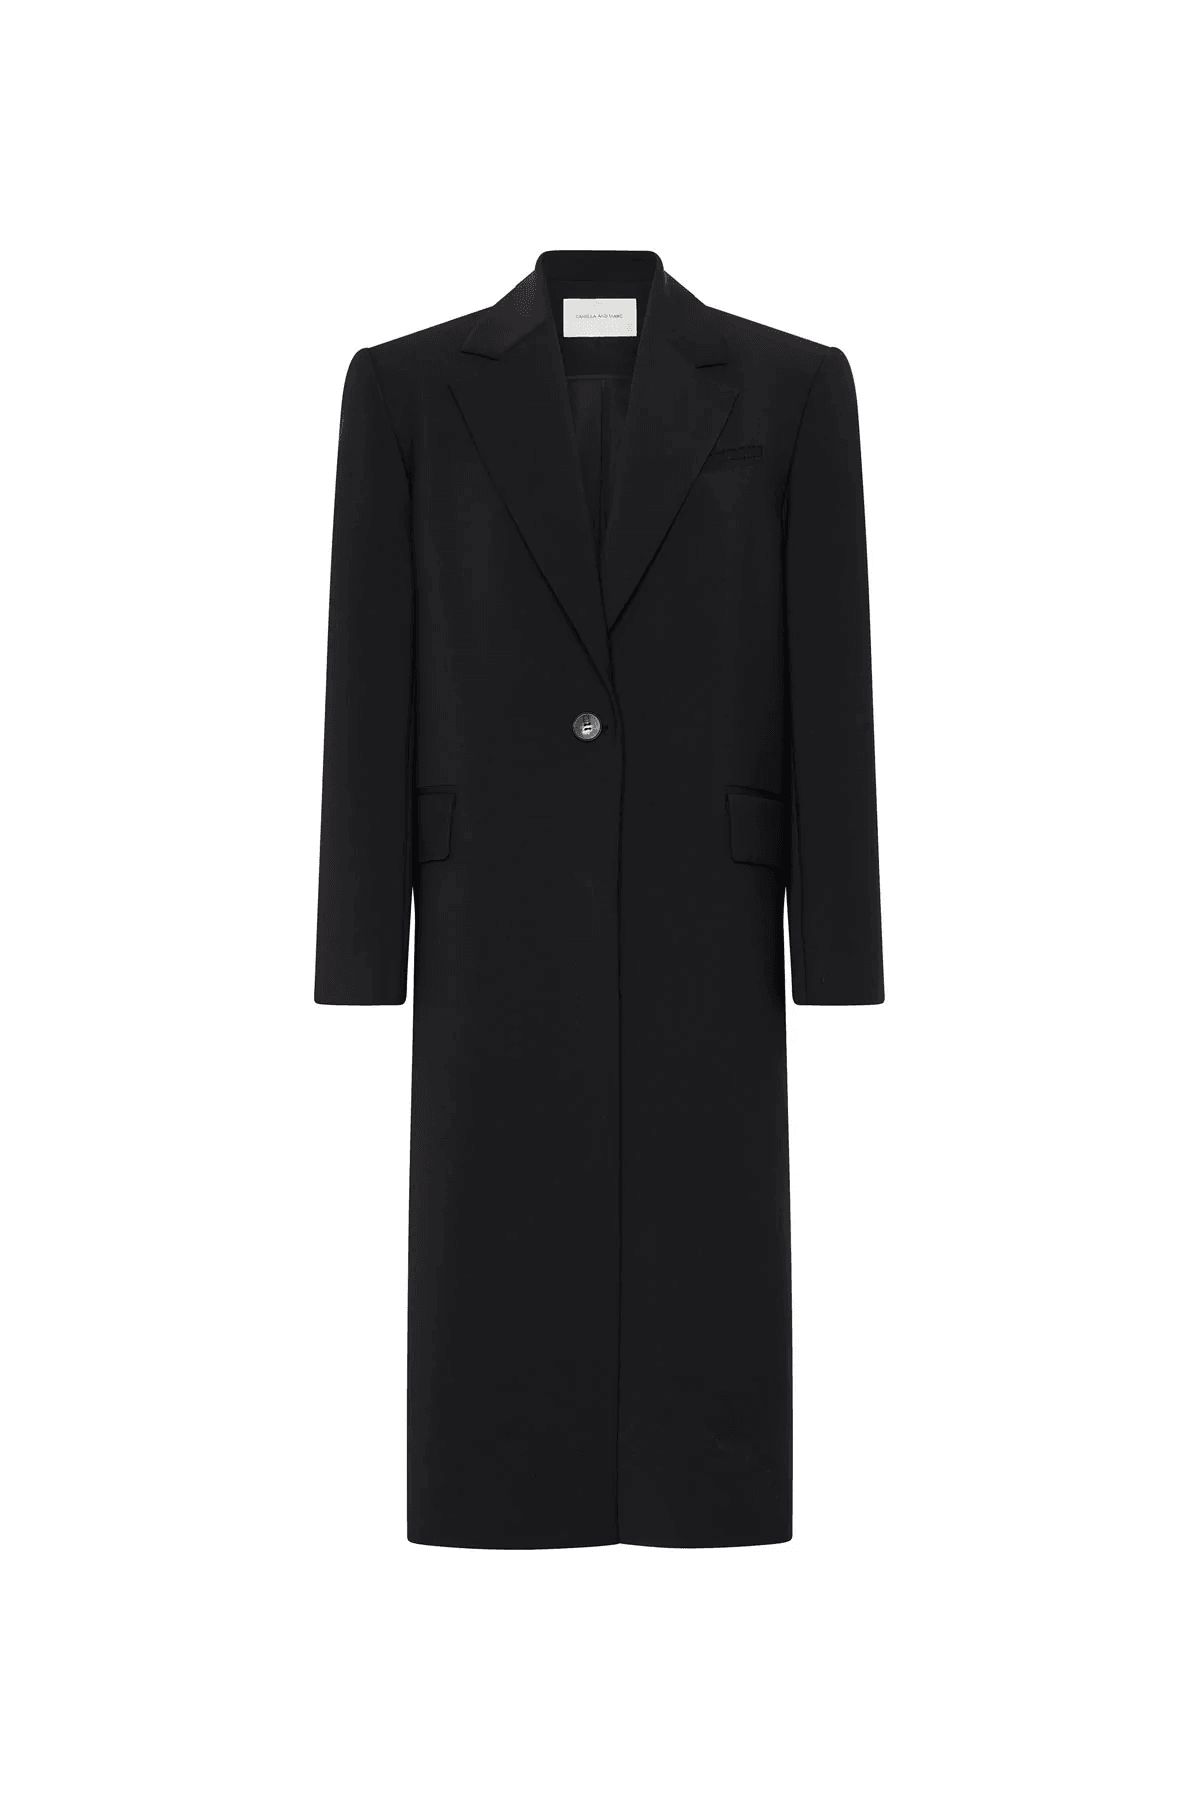 Camilla and Marc Derby Tailored Wool Coat Black – The Iconic Issue